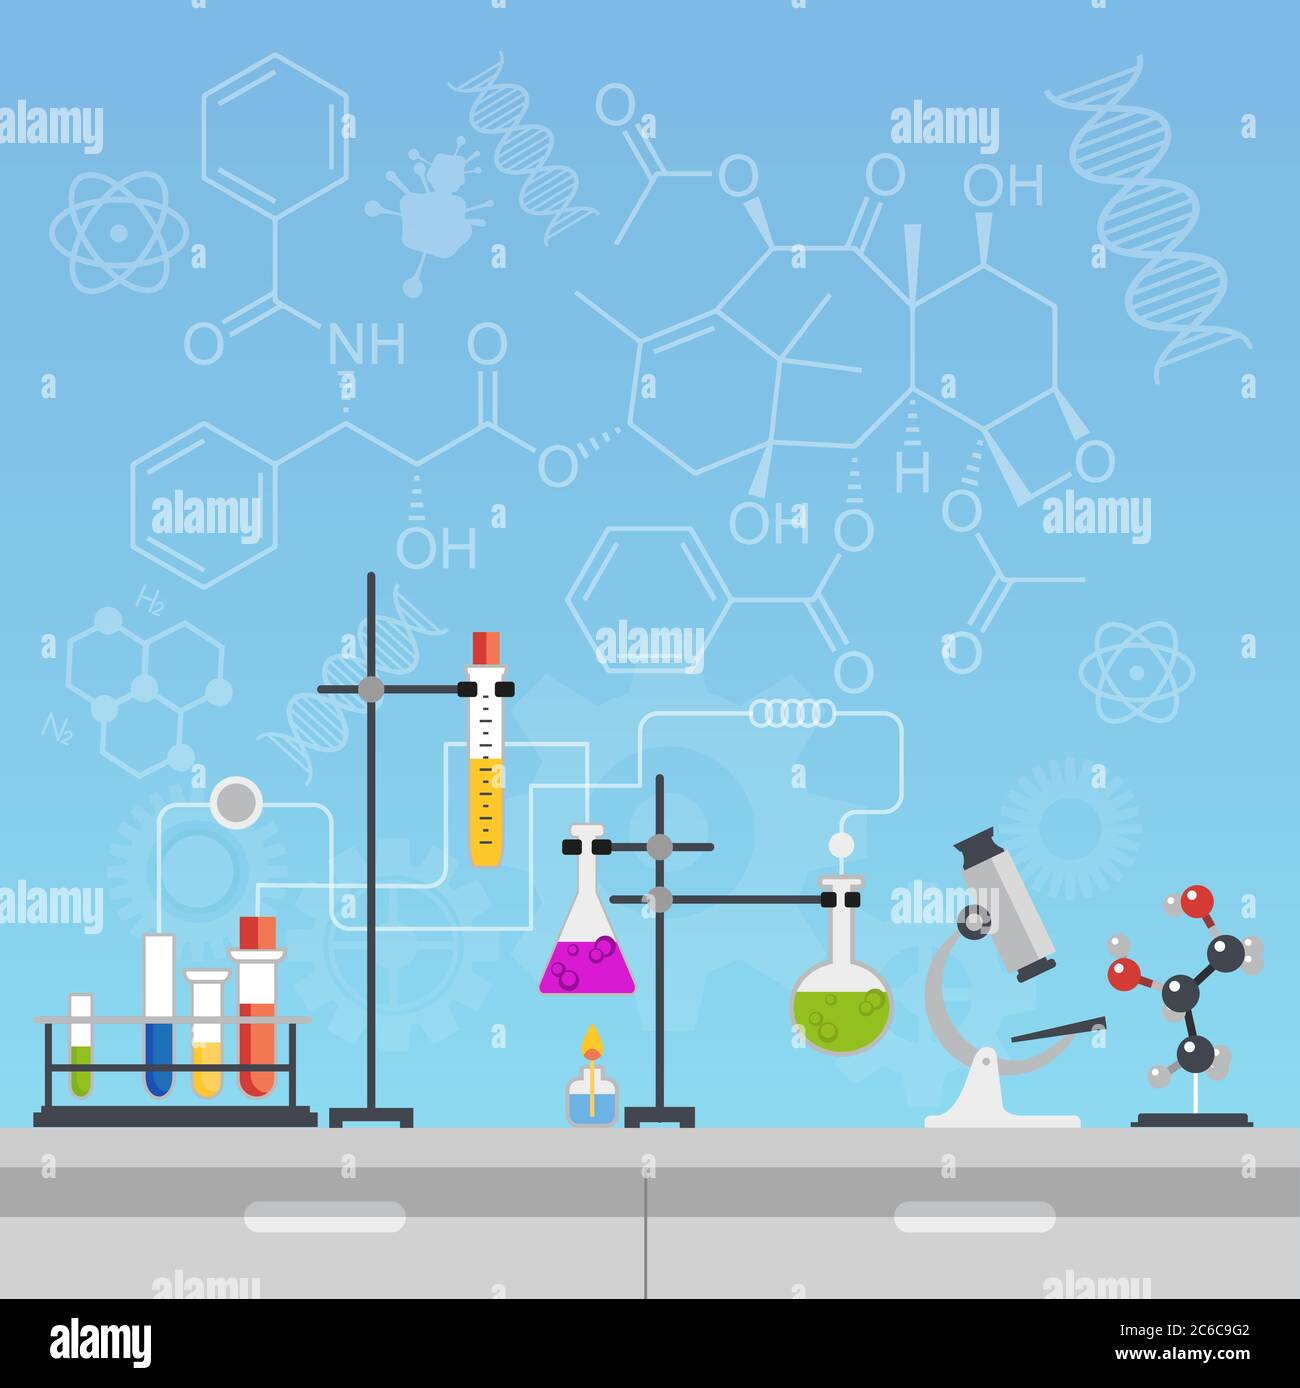 Chemical laboratory science and technology flat style design vector illustration. Scientists workplace concept Stock Vector